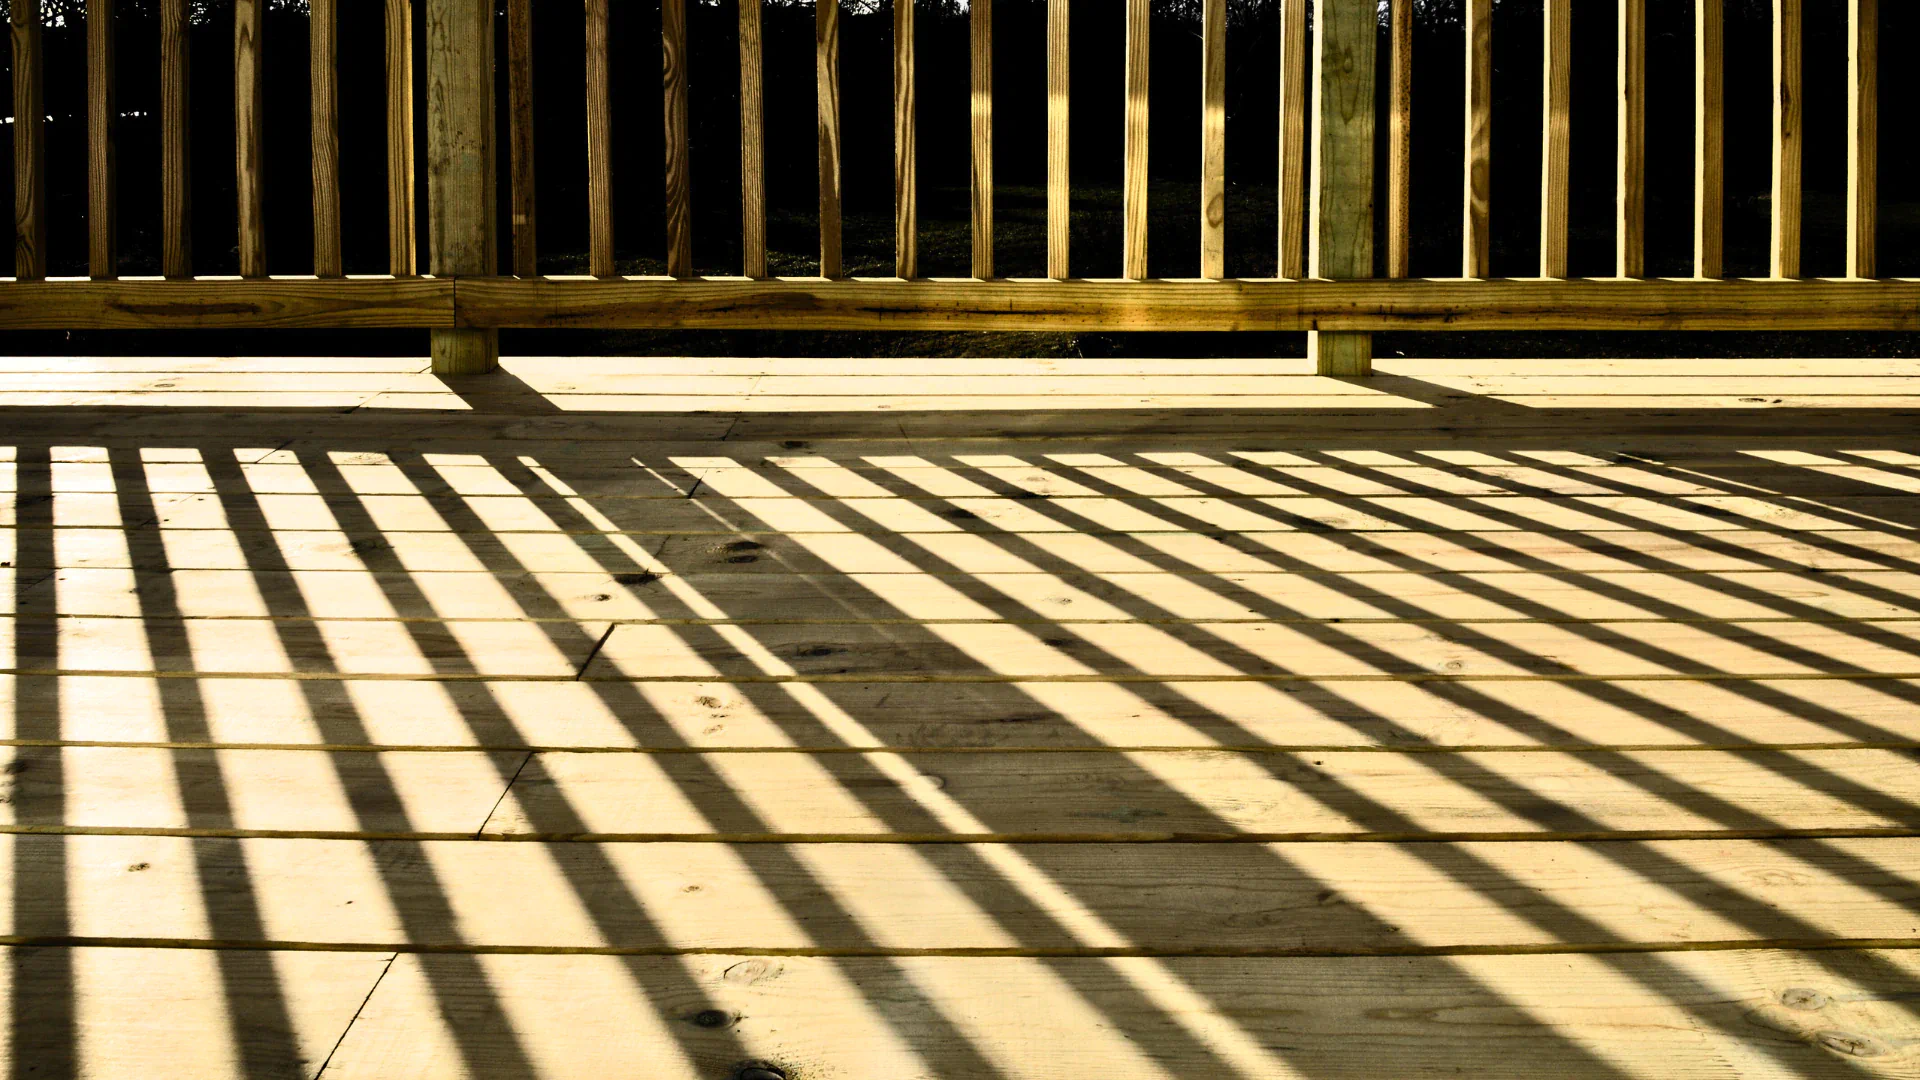 shadows being casted across the wooden deck rails seal rock or